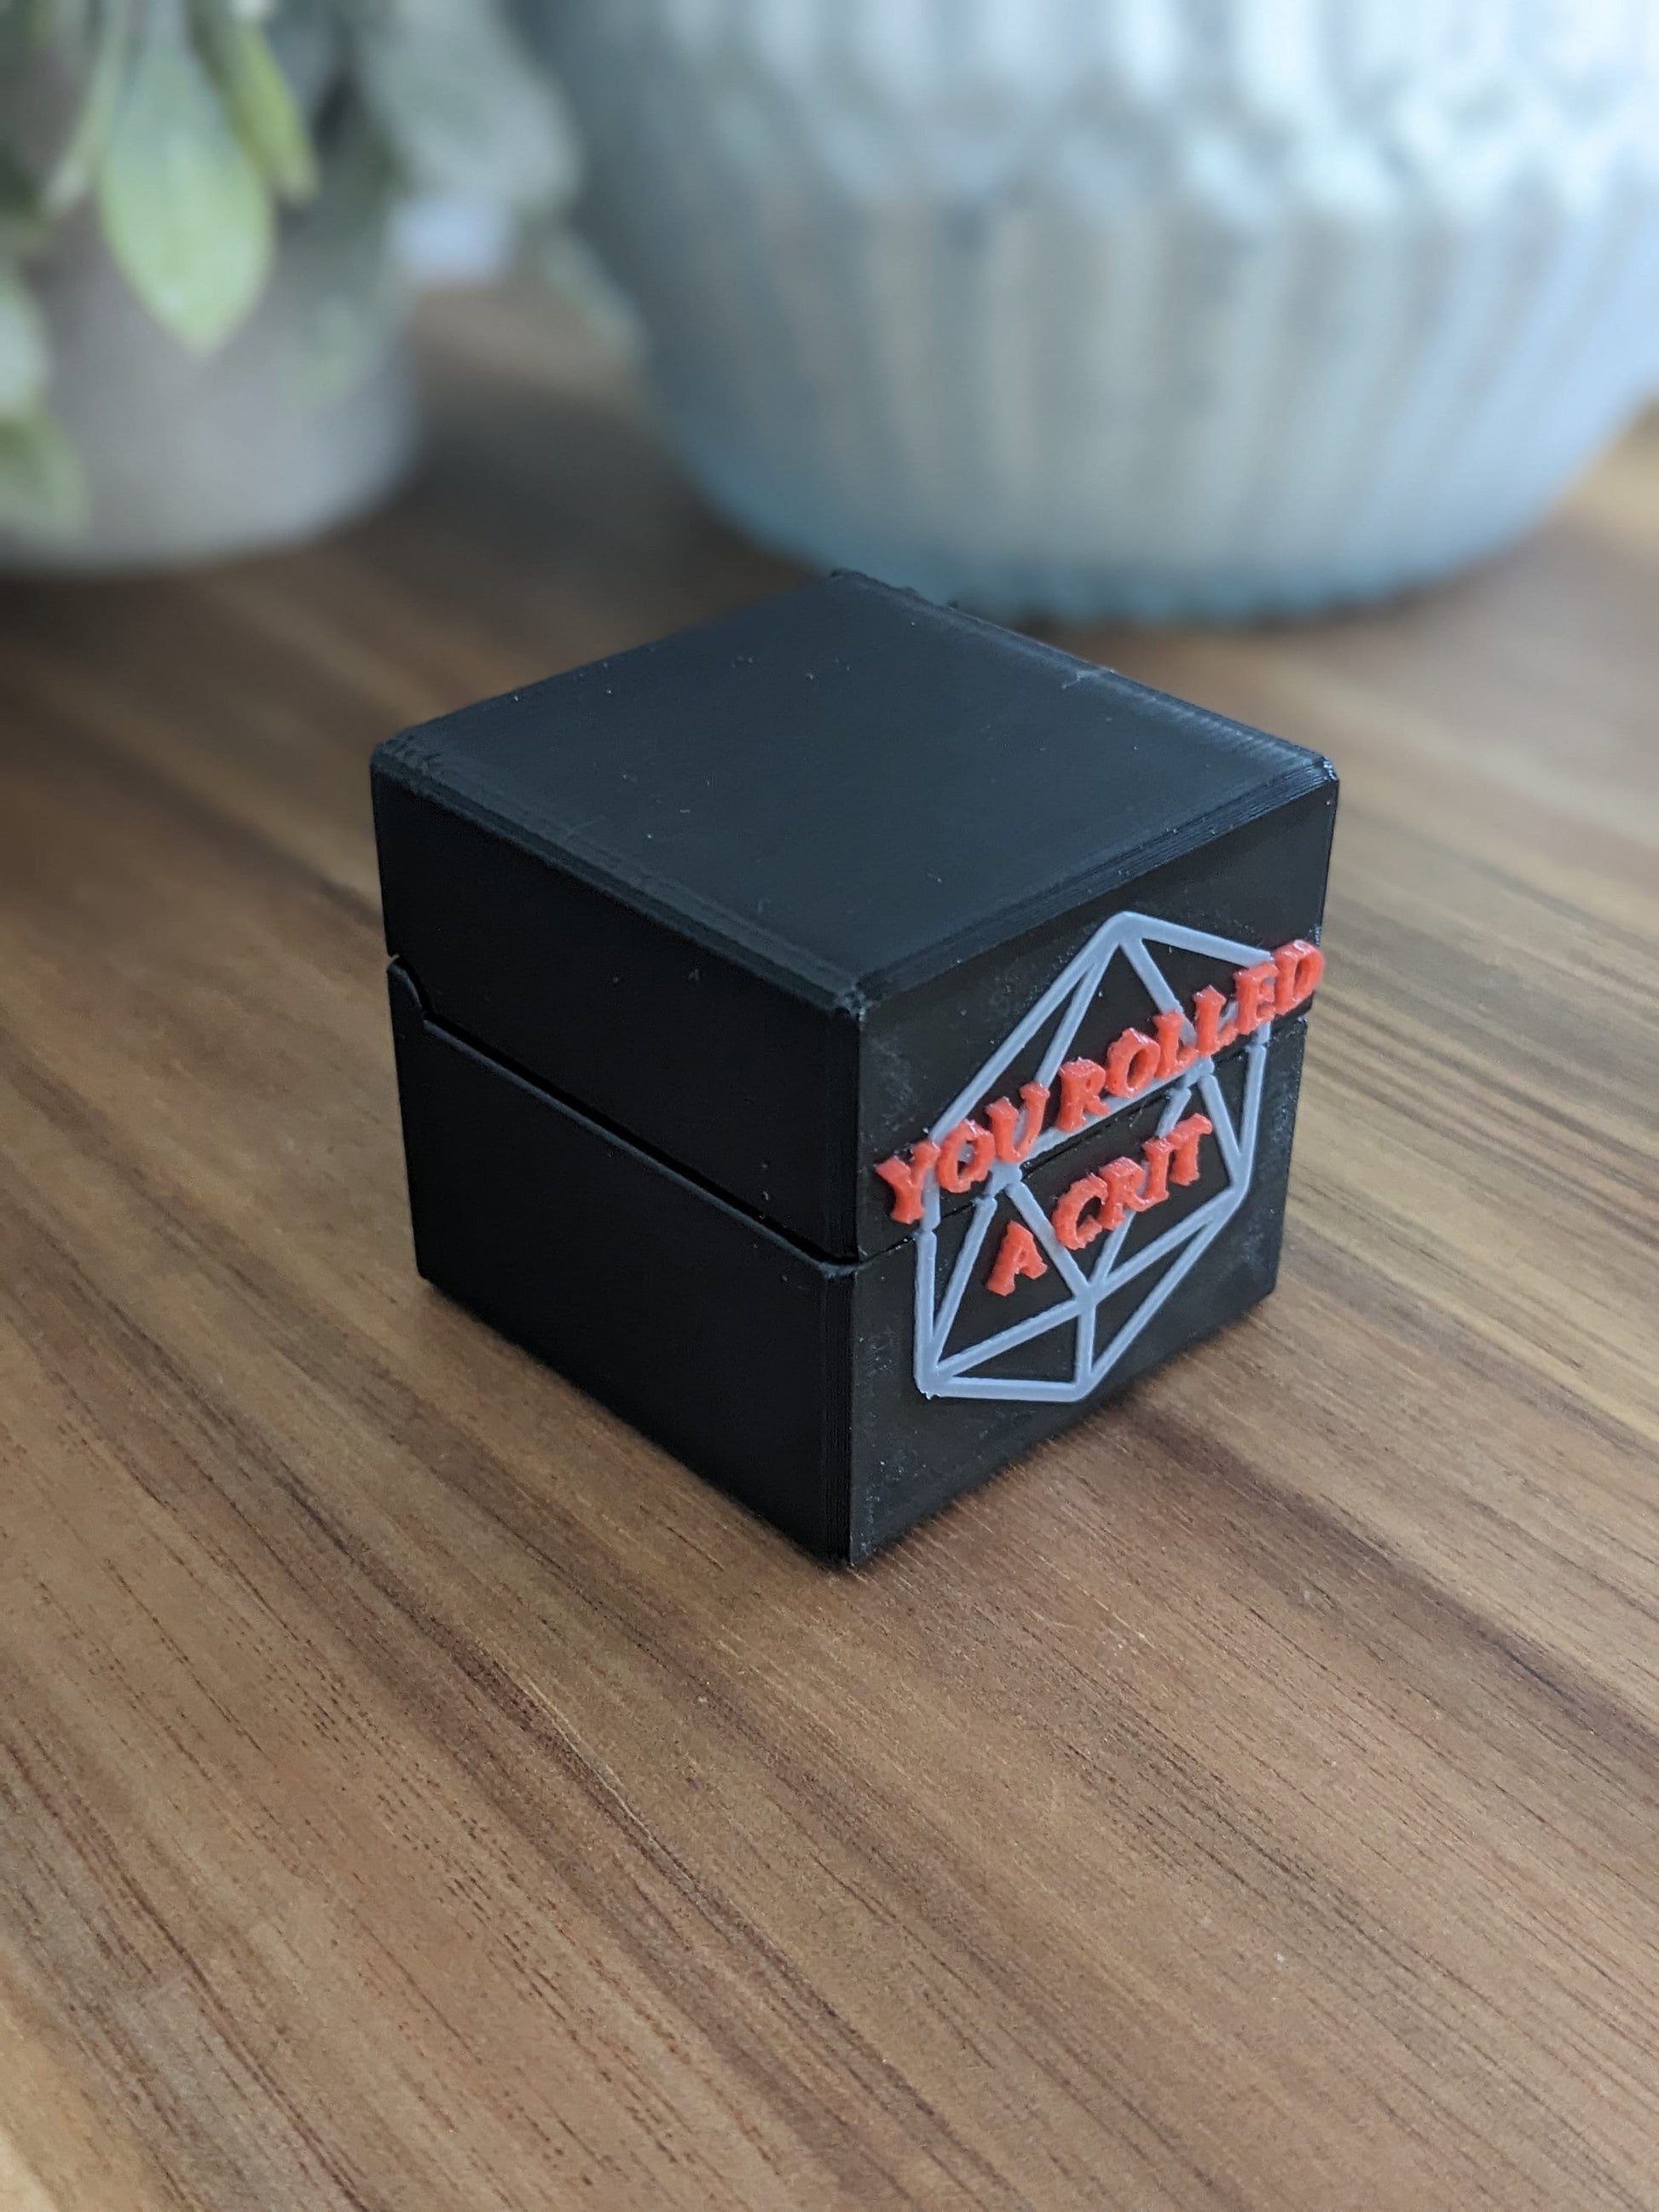 D20 You Rolled a Crit Ring Box (Proposal, Gift, Ring Bearer, ect) 20 sided dice